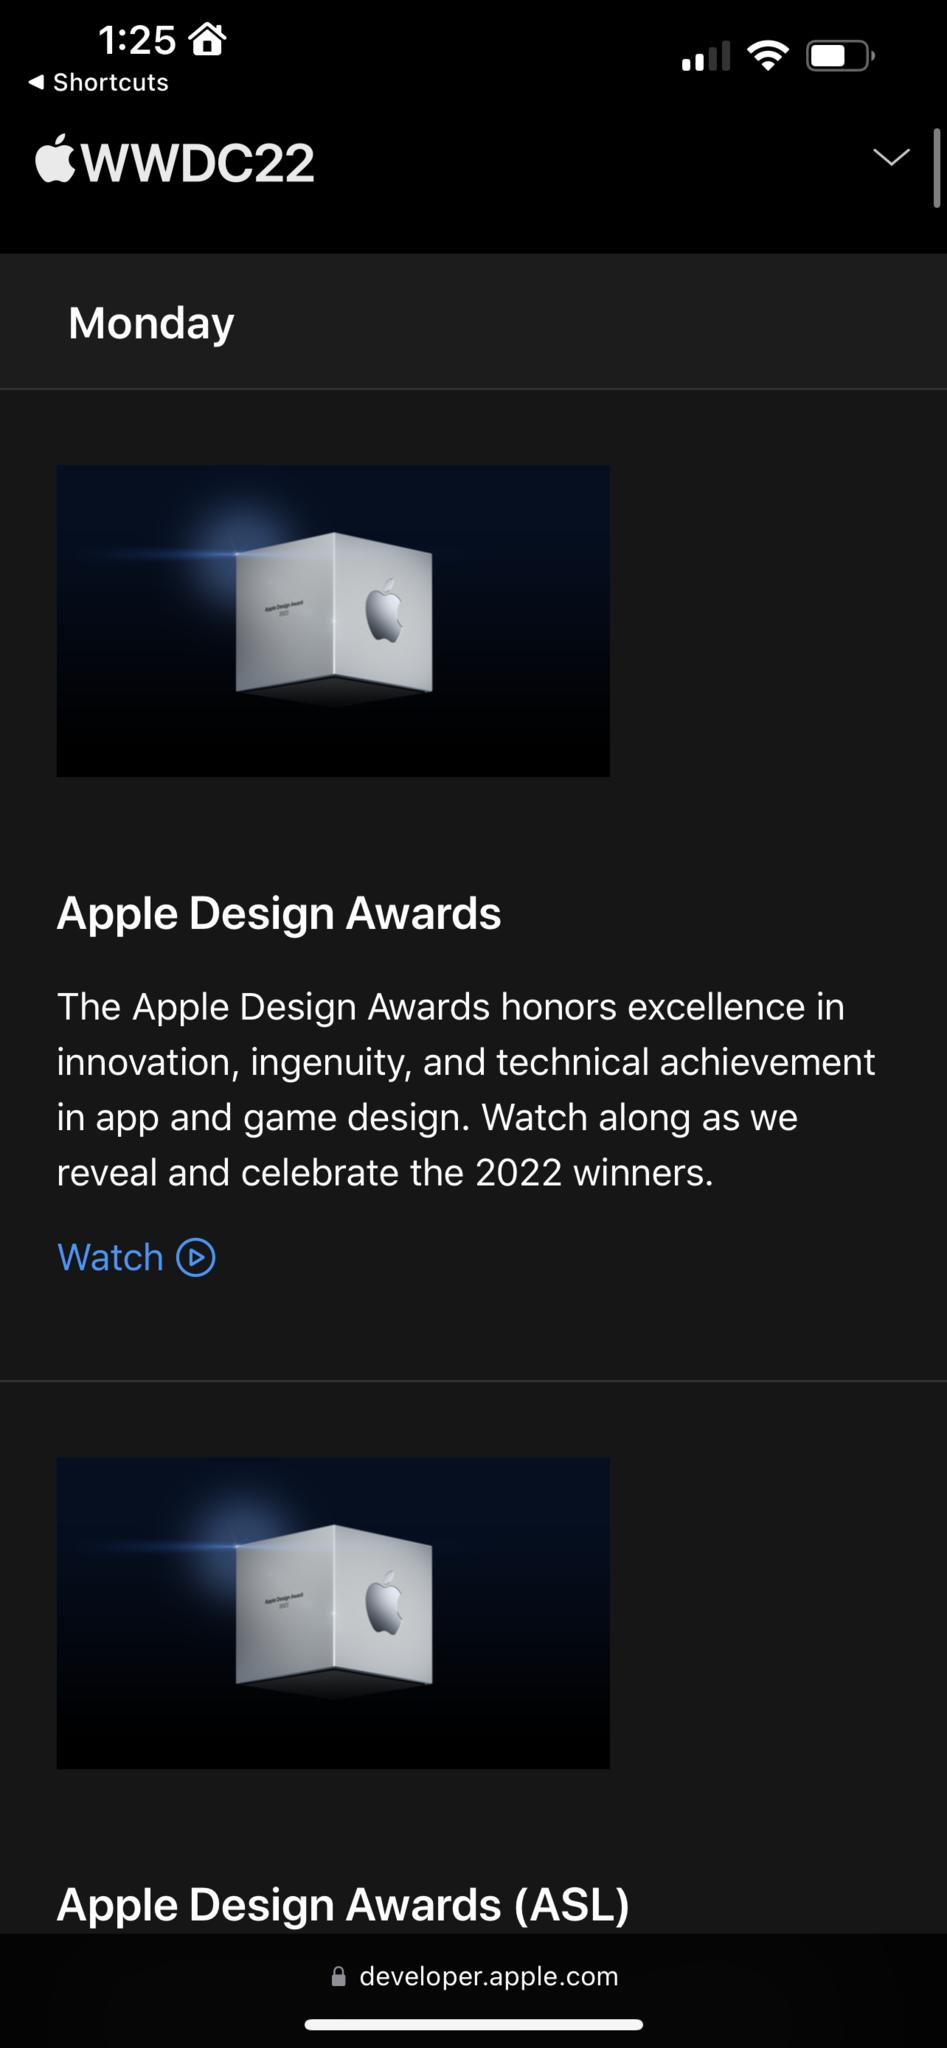 Screenshot showing the Apple Developer page for Sessions, scrolled down to the daily schedule and displaying Monday's schedule starting with the Apple Design Awards.